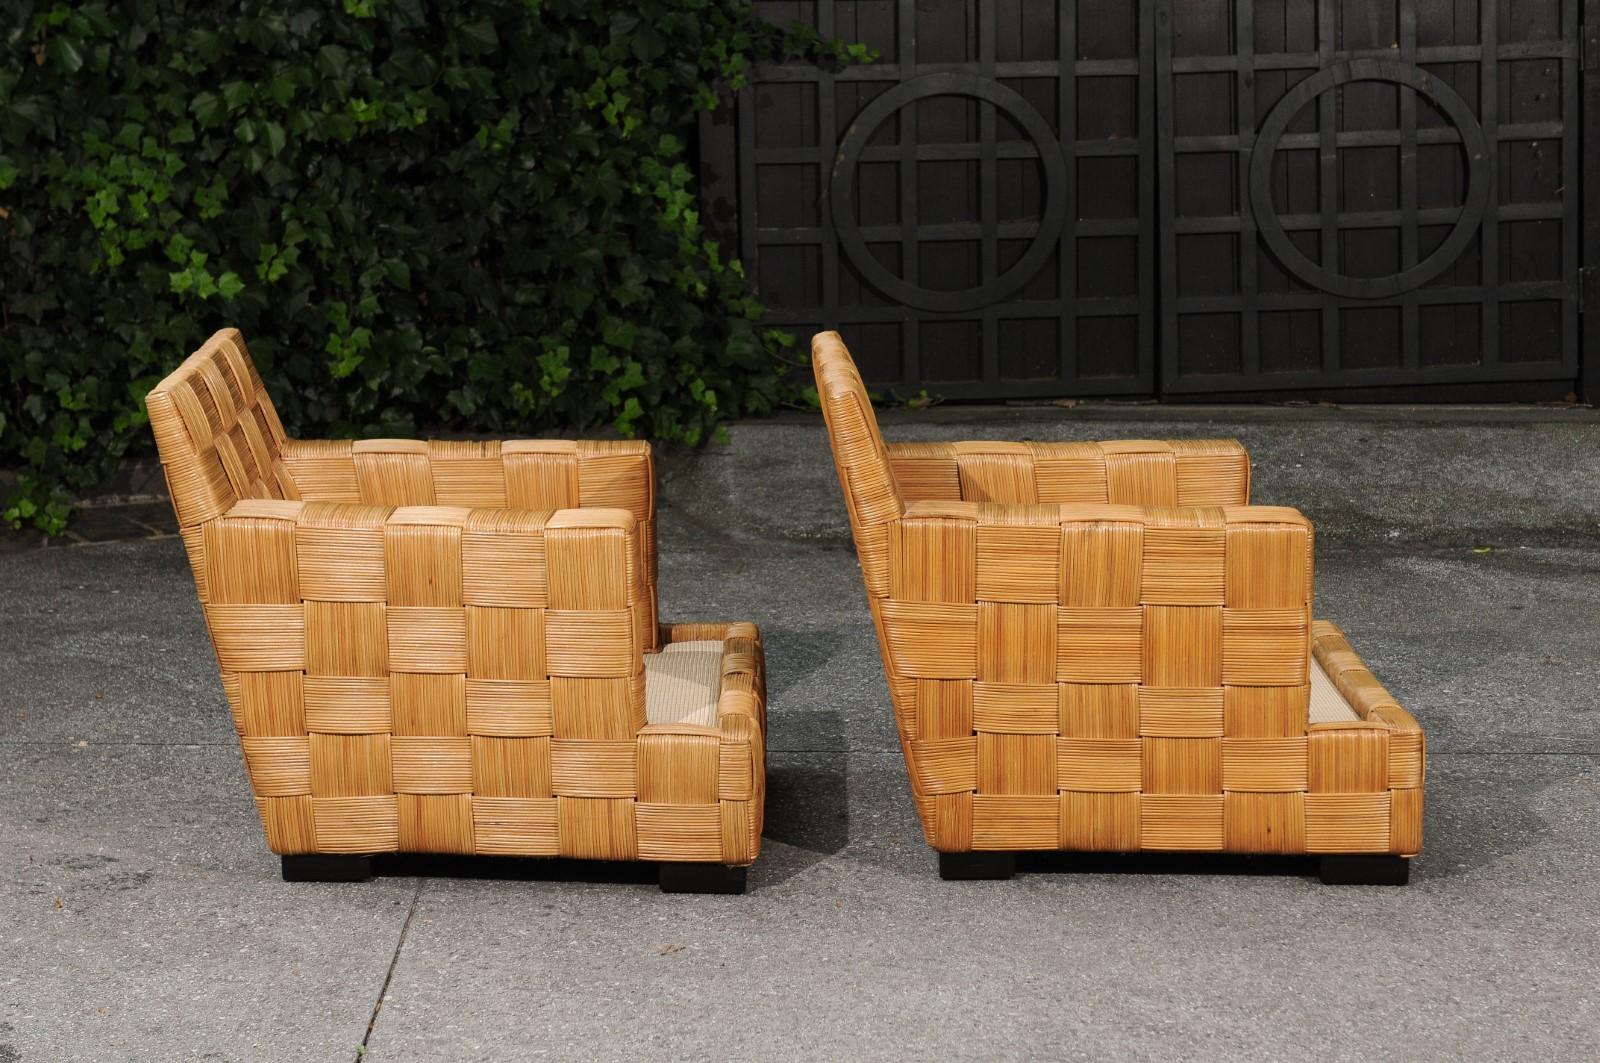 Unforgettable Set of of 4 Block Island Cane Chairs by John Hutton for Donghia For Sale 3